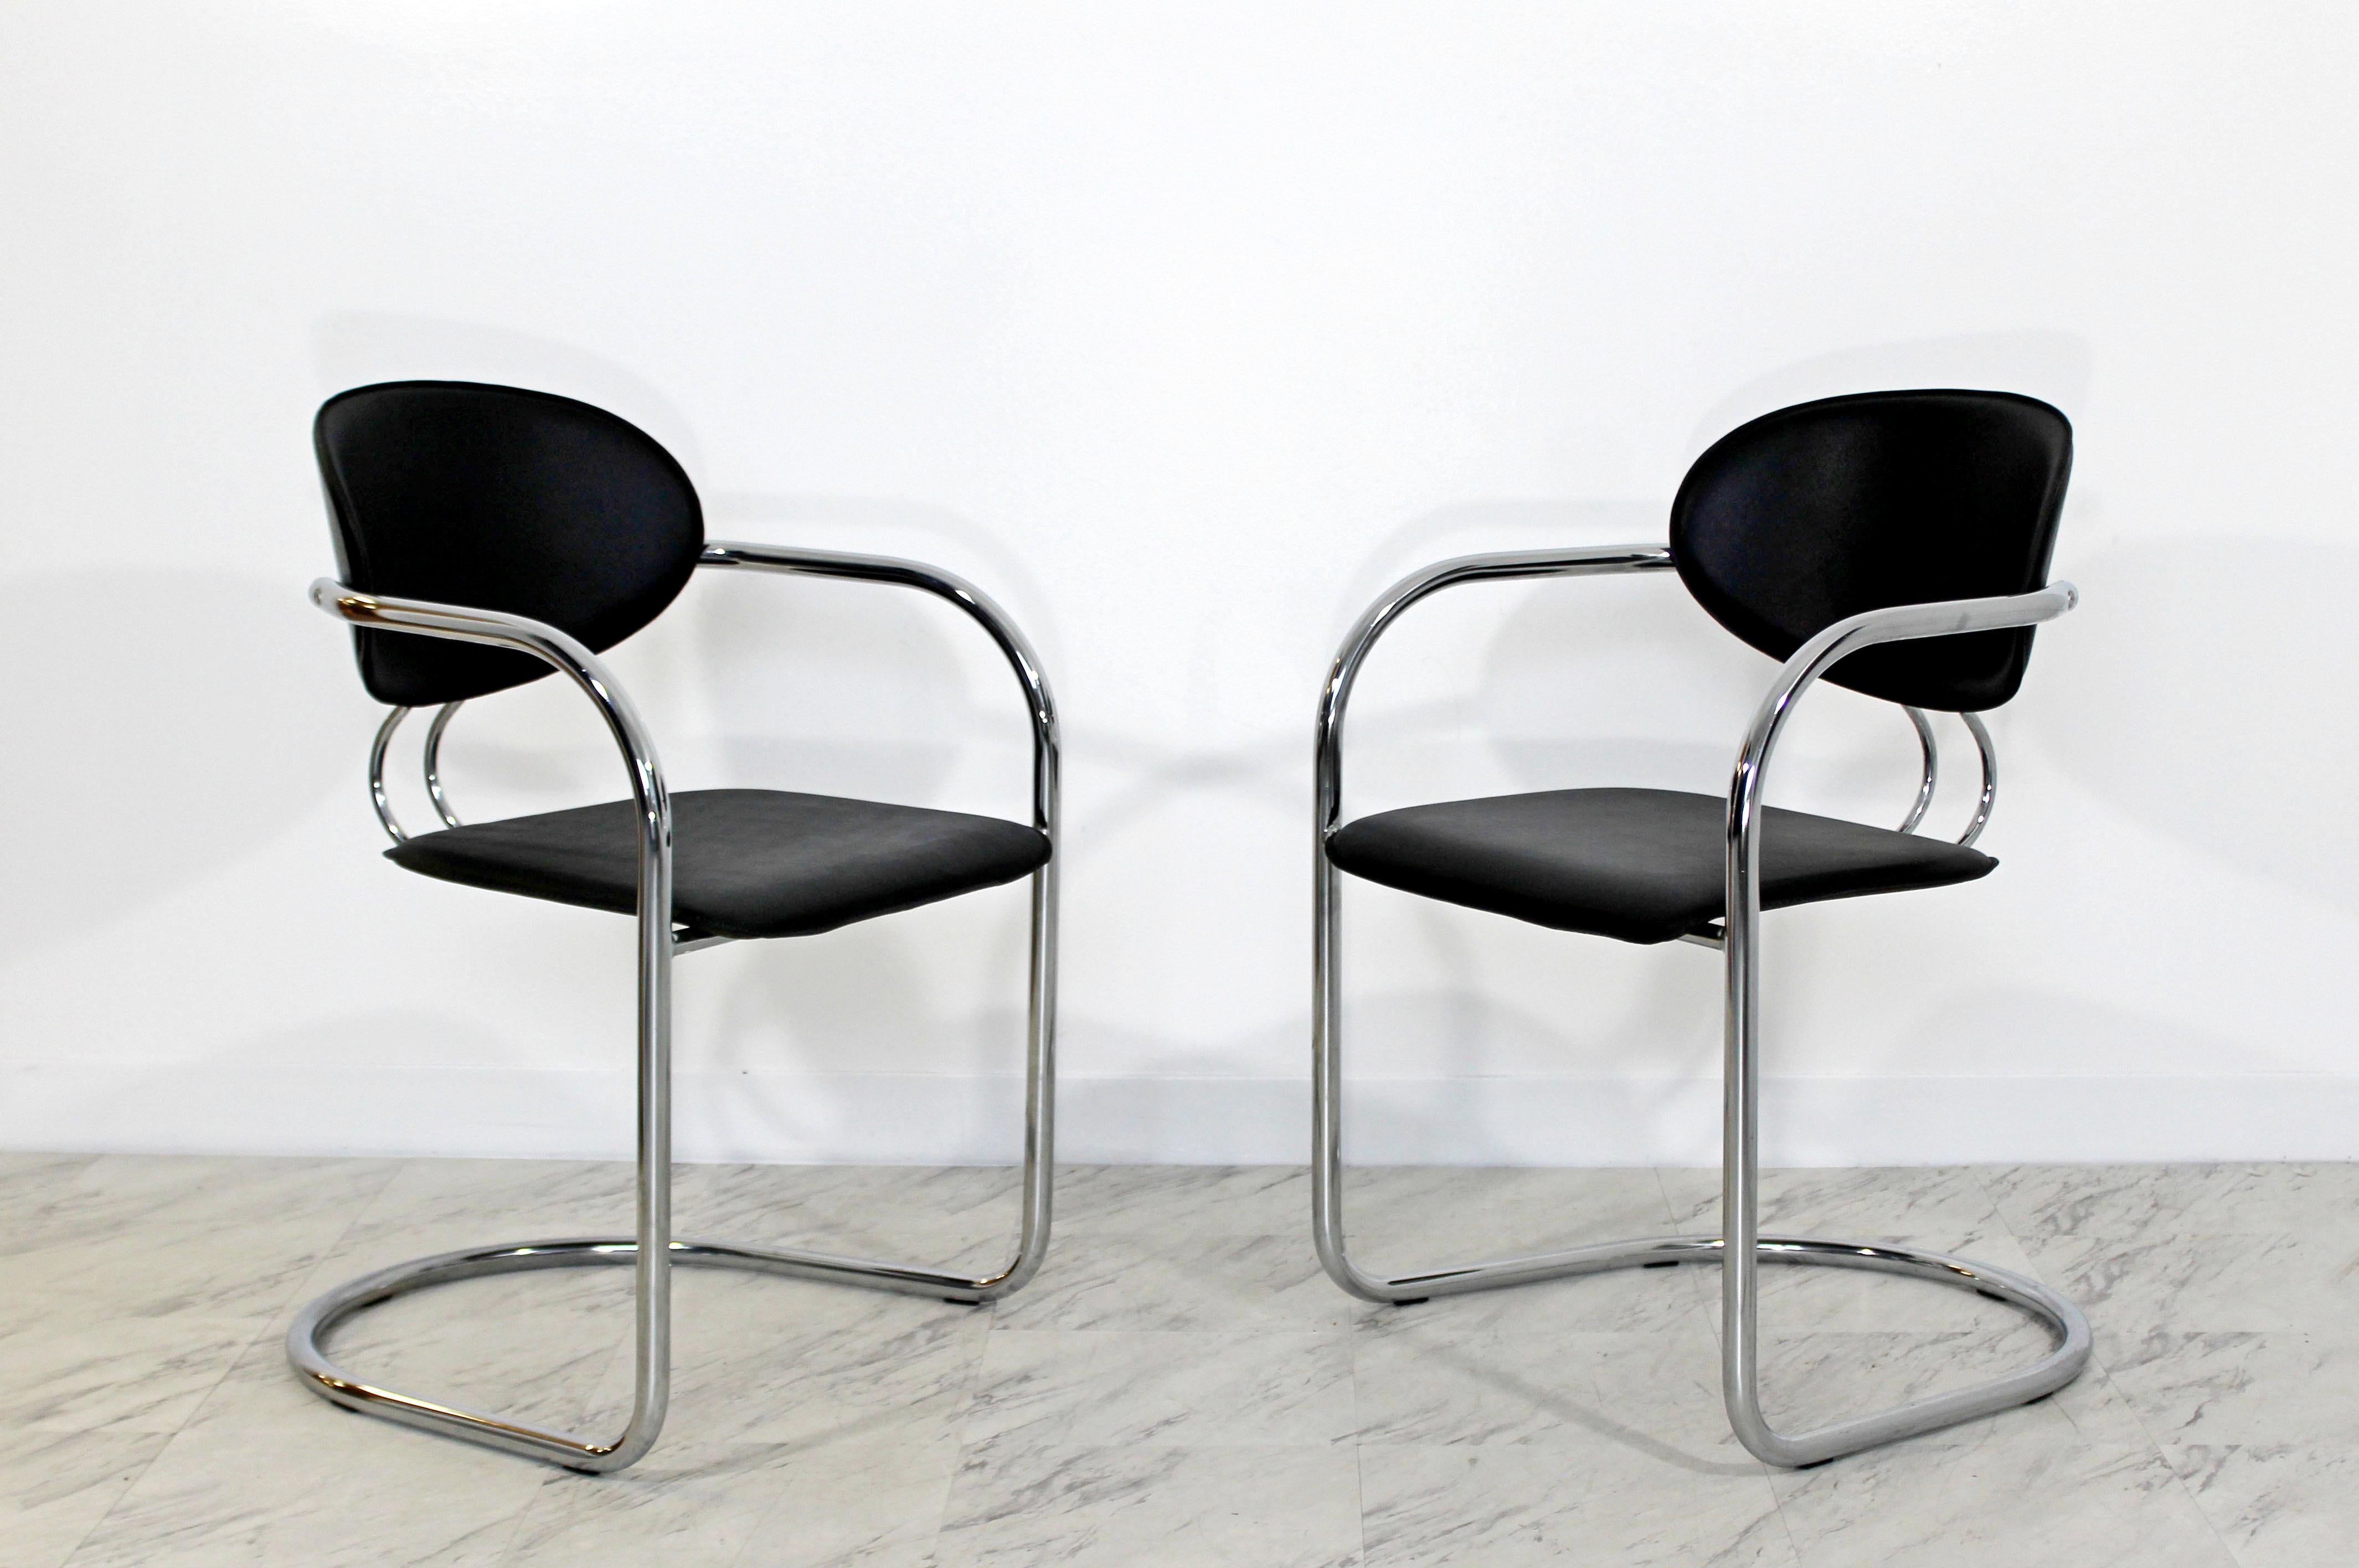 For your consideration is a phenomenal set of six, cantilever chrome and black leather, dining armchairs, by B&B Italia, made in Italy, circa the 1970s. In excellent condition. The dimensions are 22